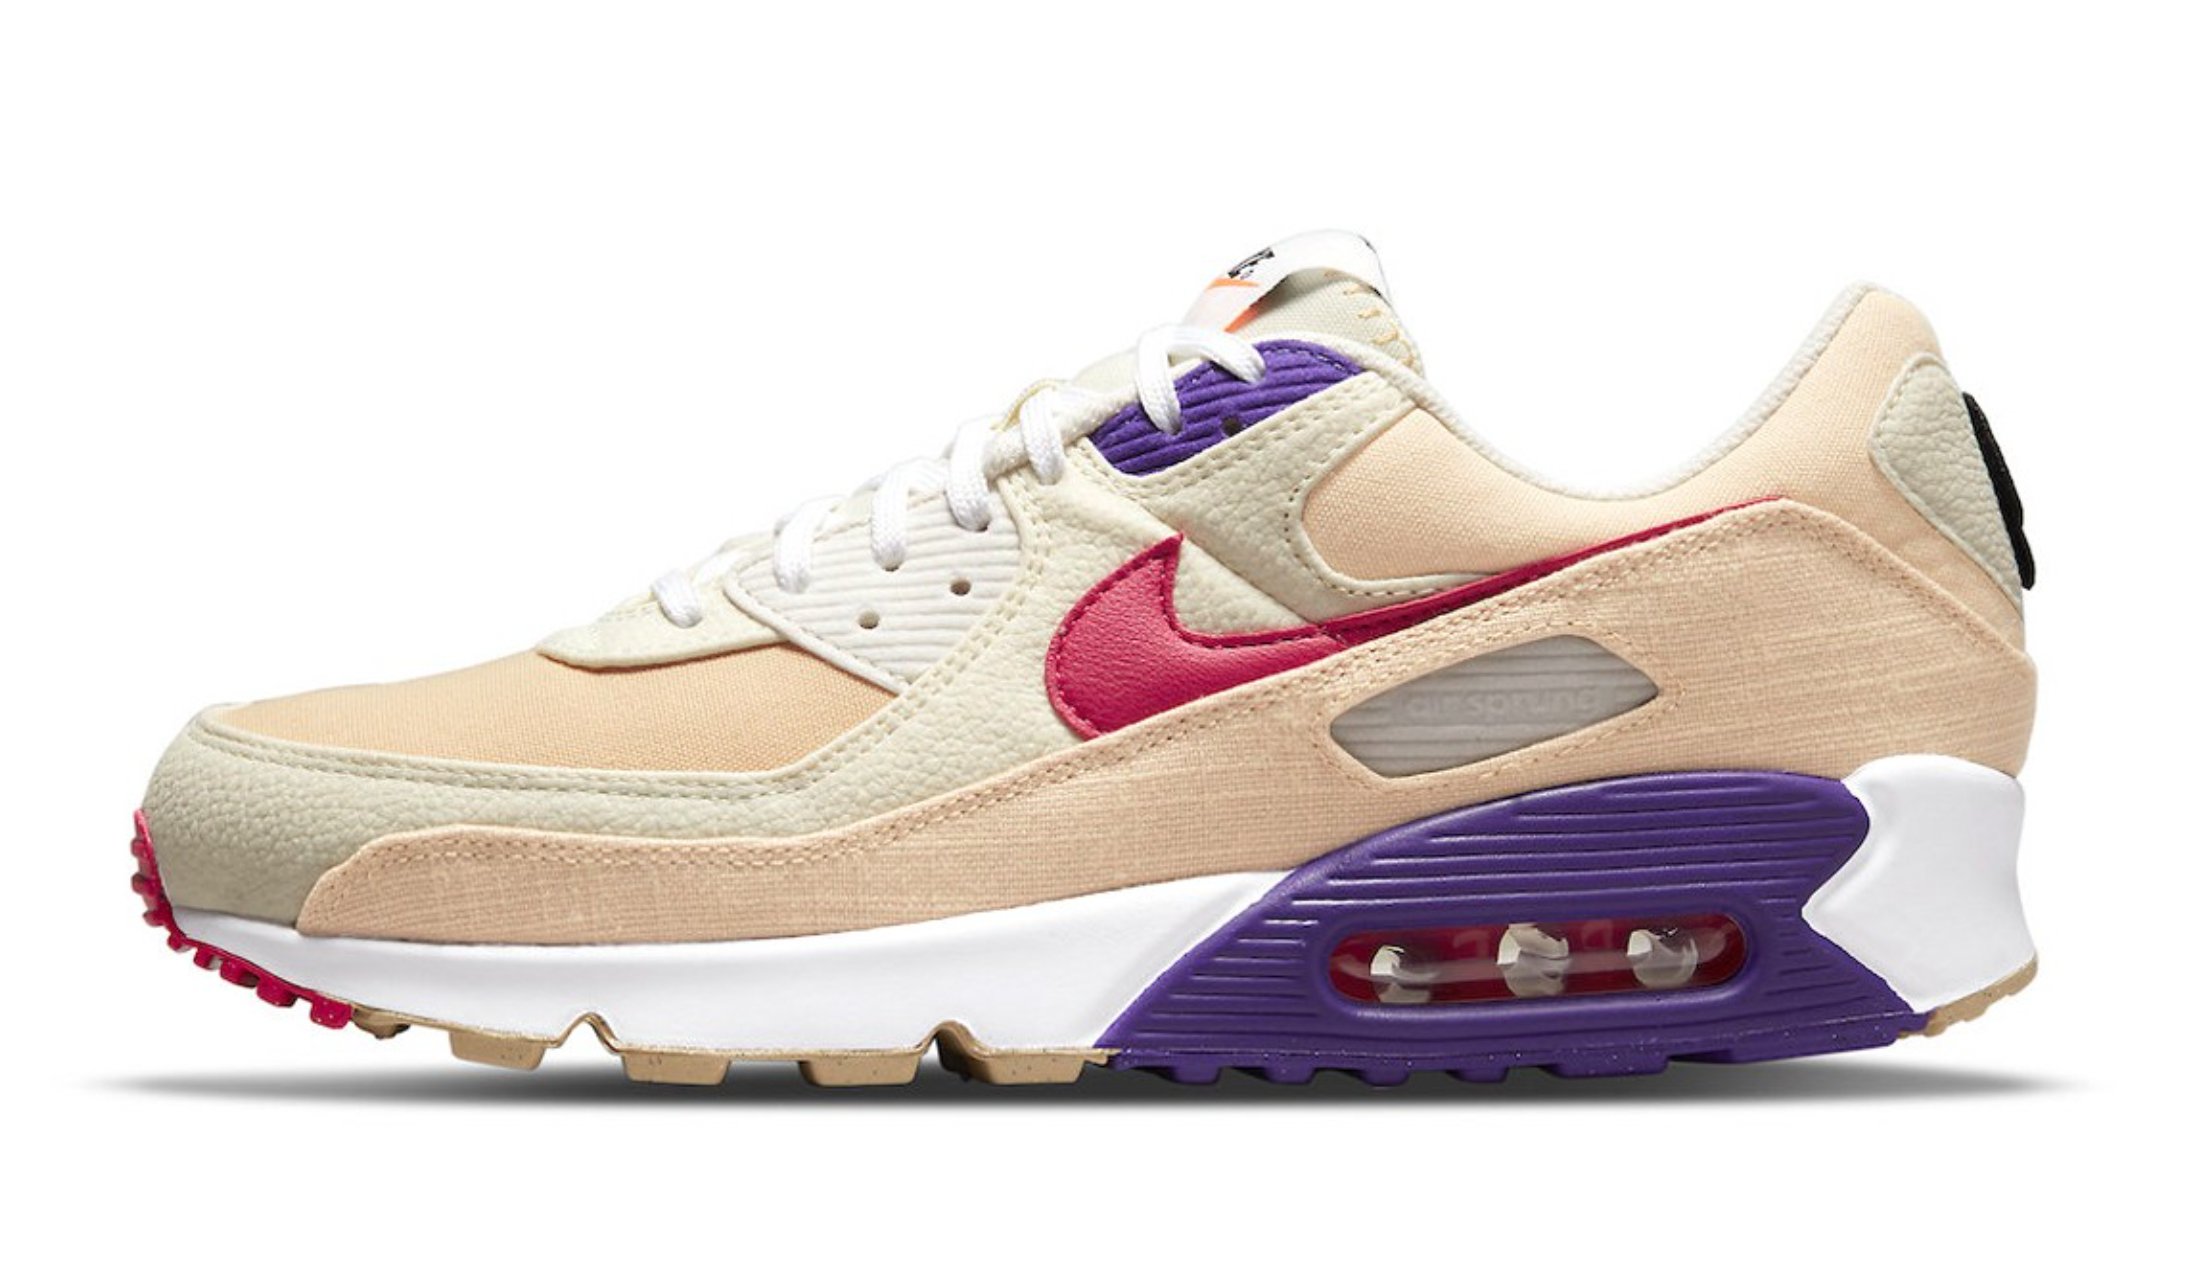 inalámbrico embrague paridad Miguel Morales on Twitter: "¿Yay or Nay? Nike Air Max 90 "Air Sprung"  #sneakers #nike #airmax https://t.co/uyNoWk5wCG" / Twitter